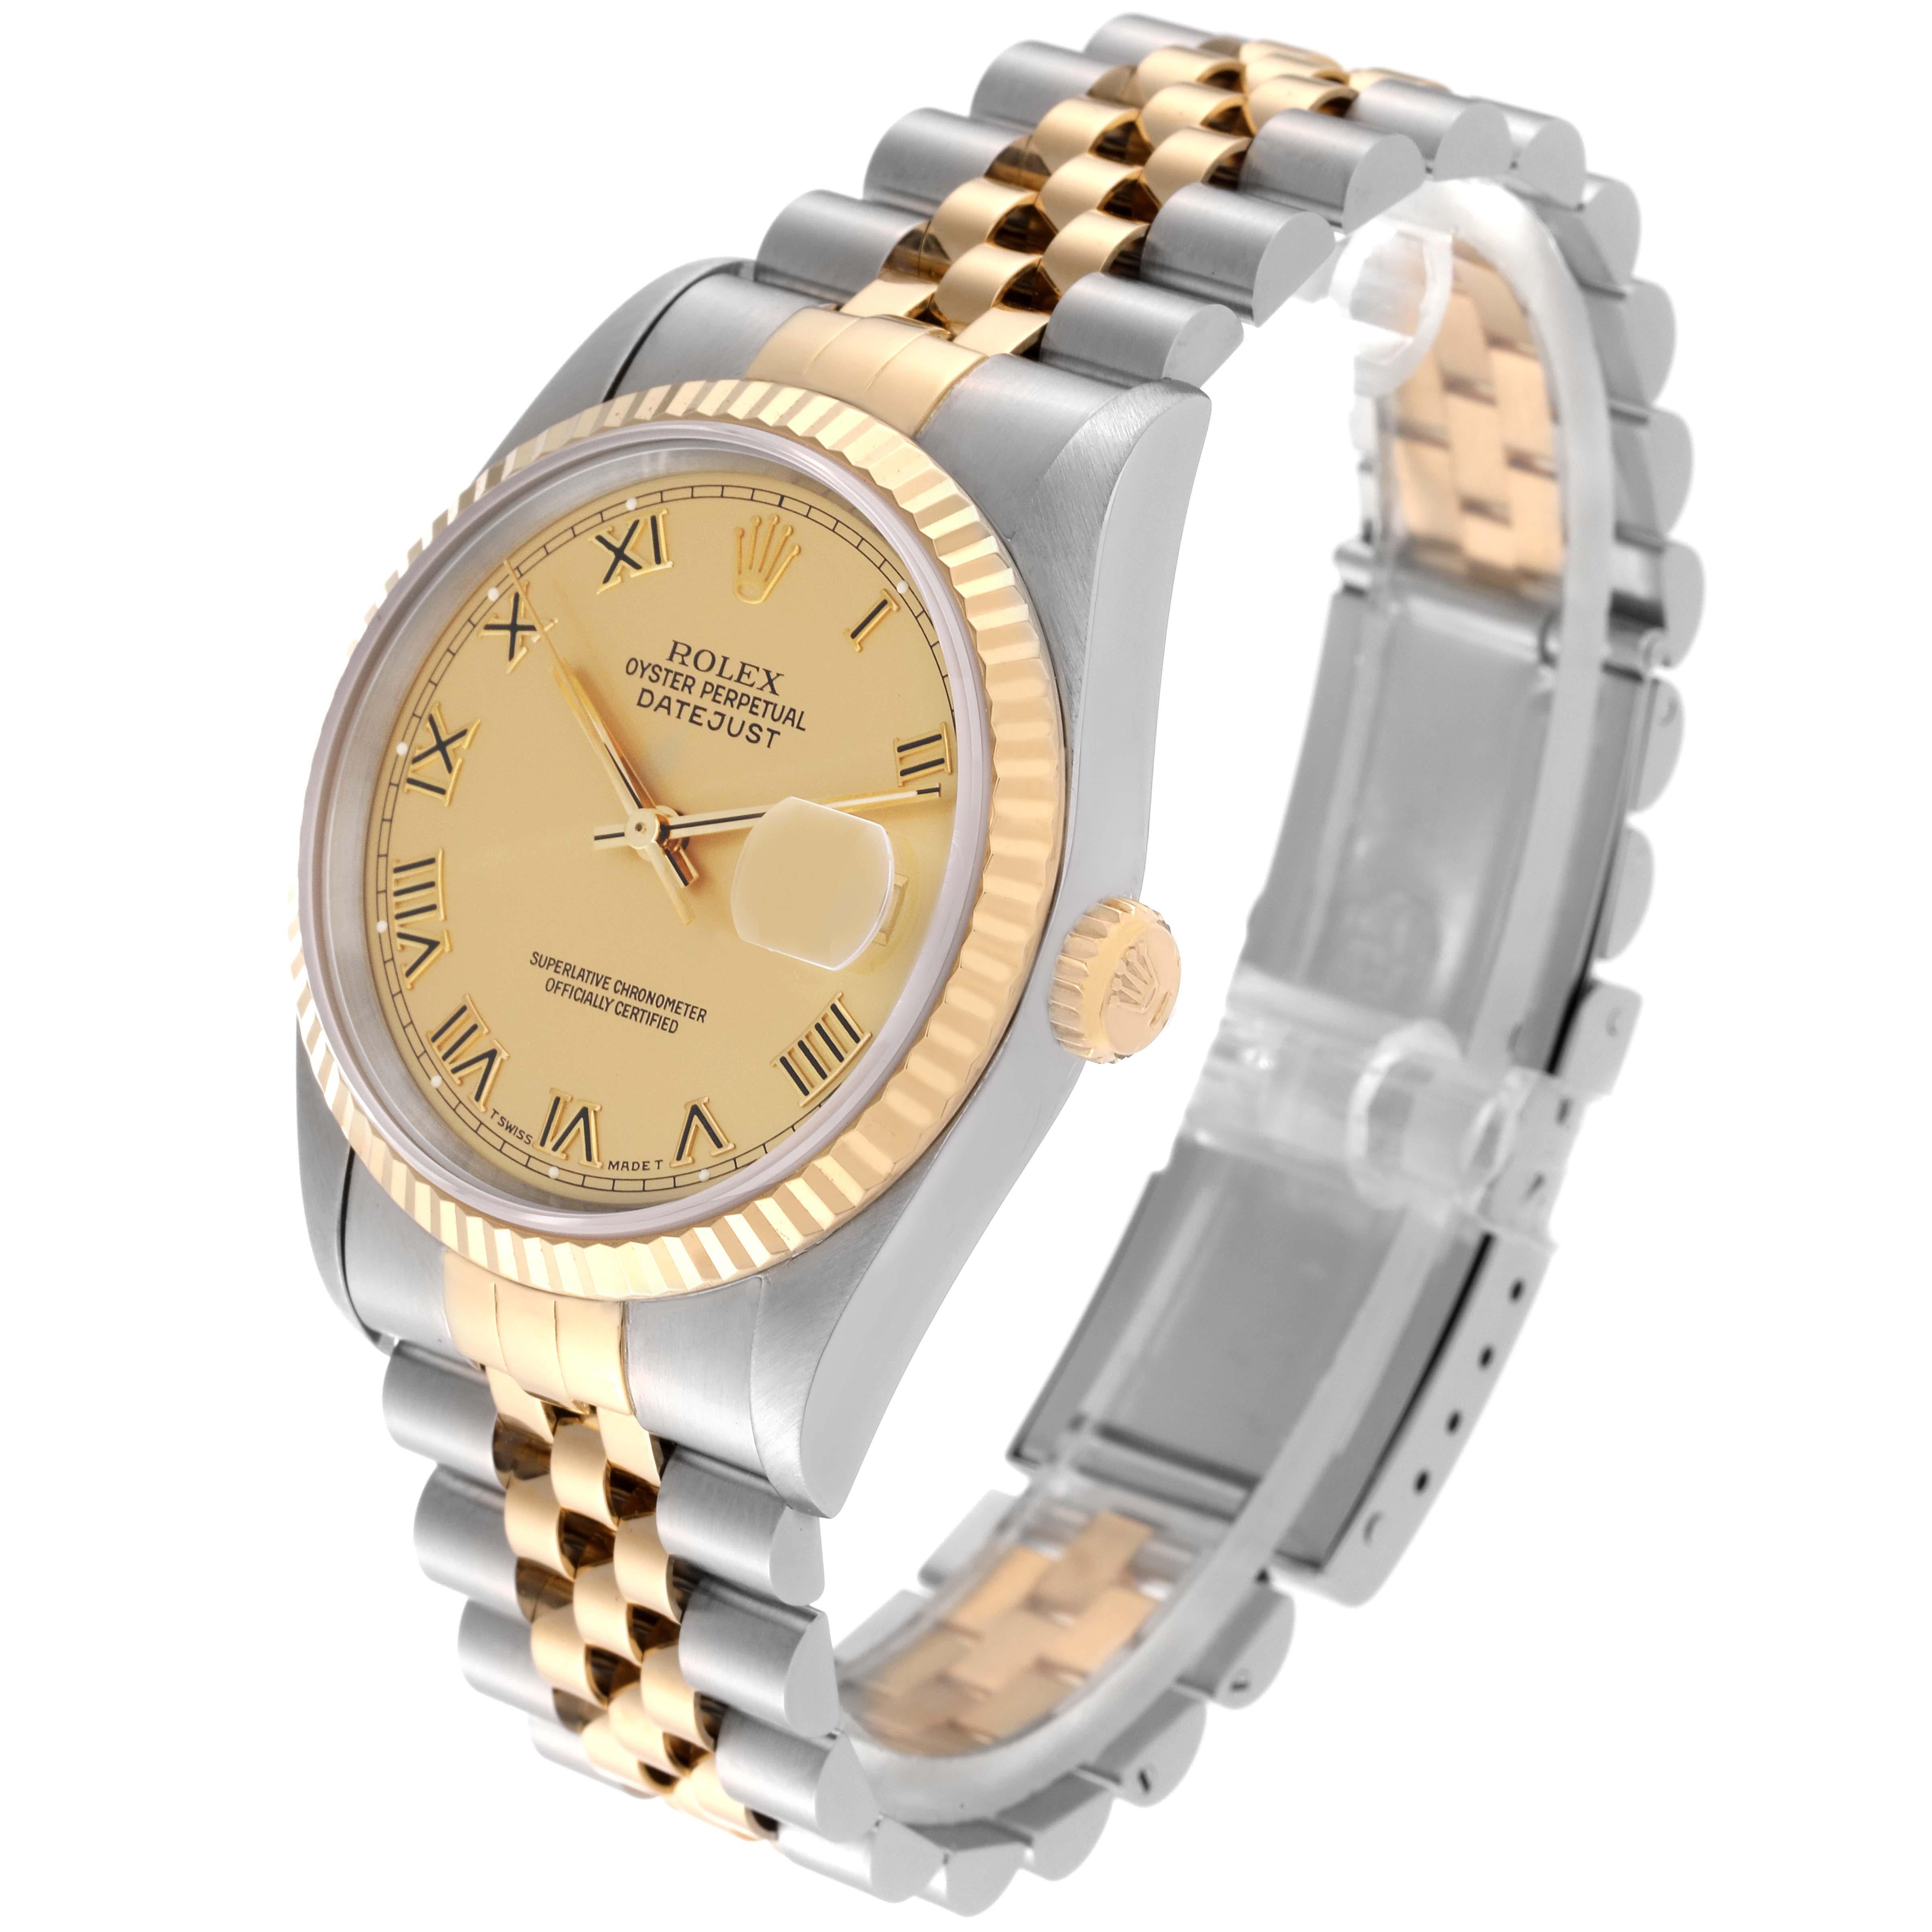 Rolex Datejust Steel Yellow Gold Champagne Dial Mens Watch 16233 For Sale 7